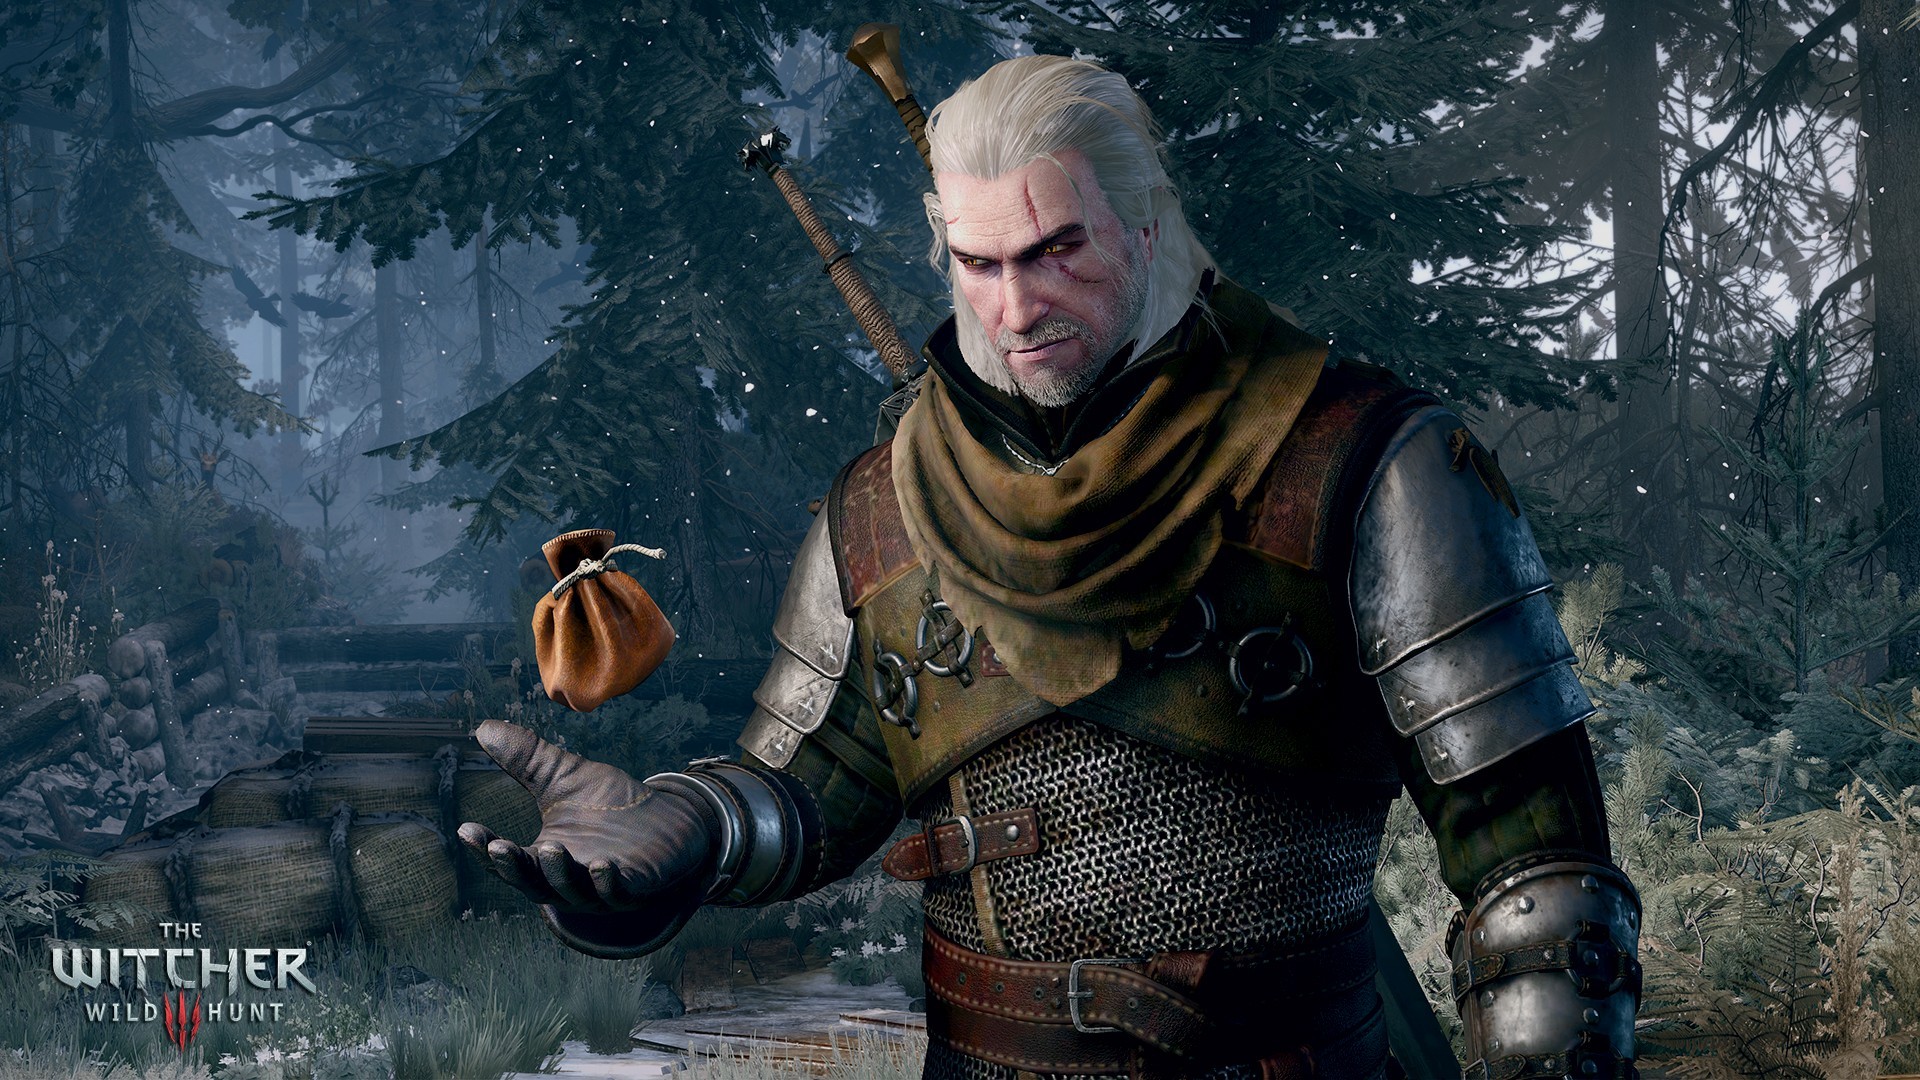 E3 2019: The Witcher 3 Coming To Nintendo Switch